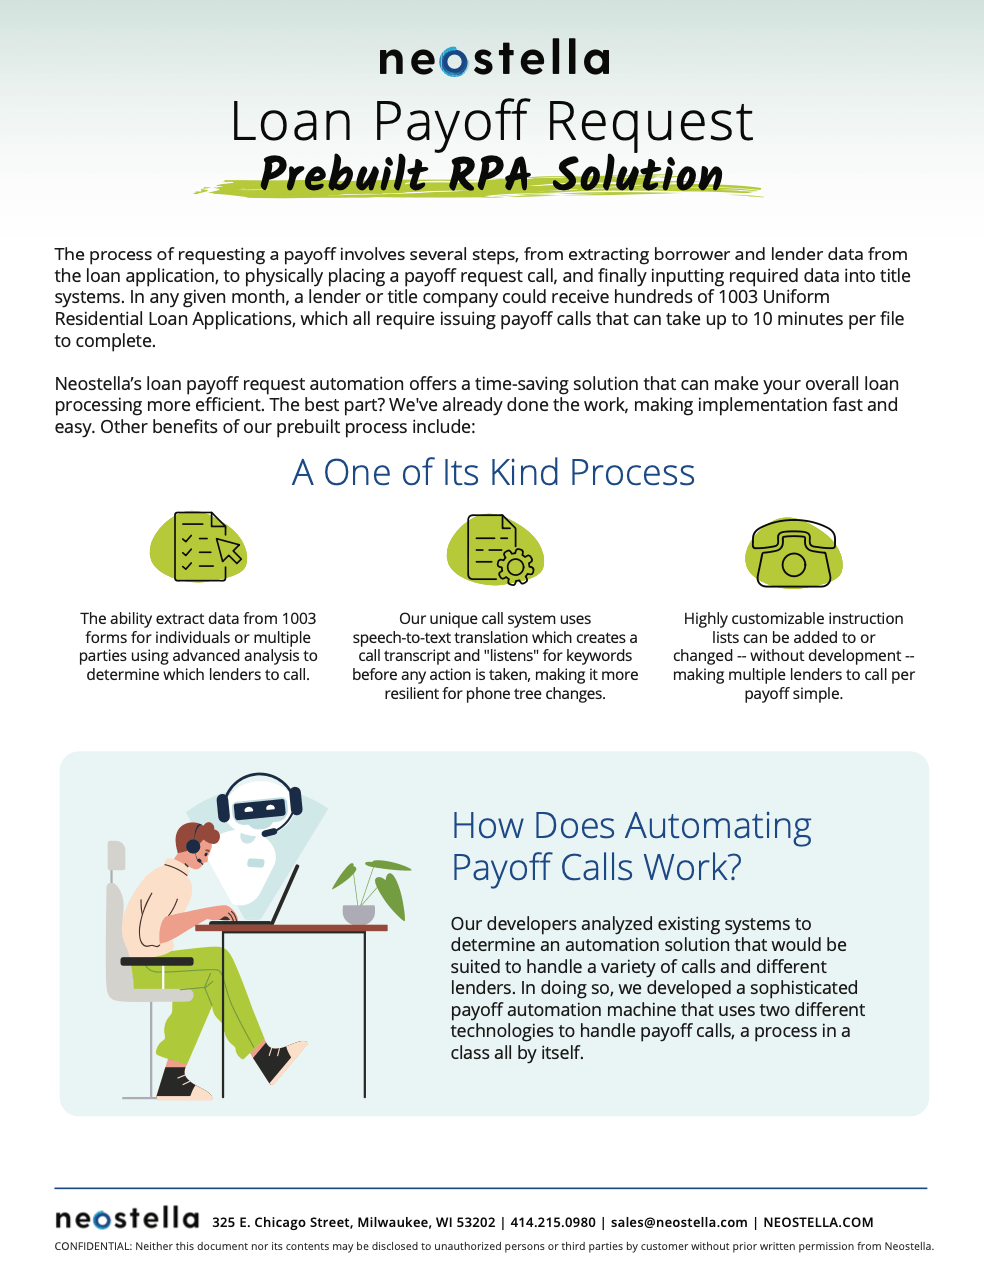 A preview of the download guide for Neostella's RPA banking solutions